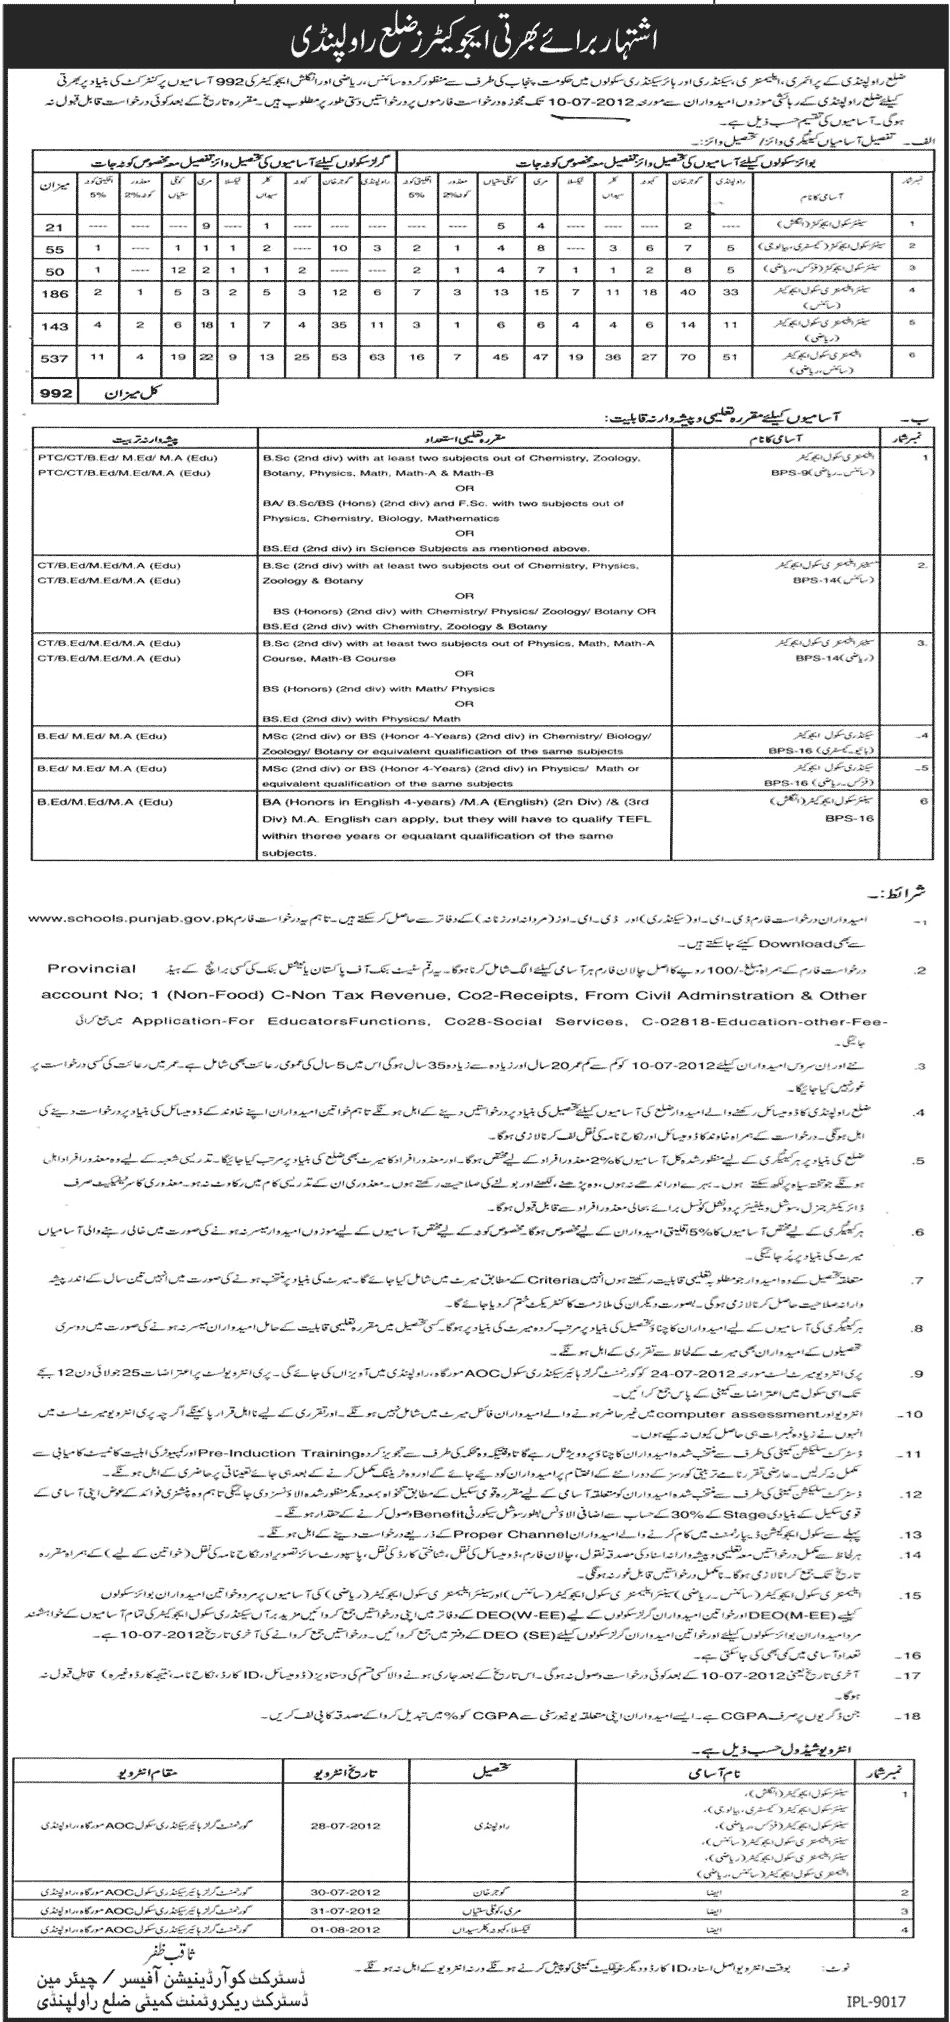 Teachers/Educators Required by Government of Punjab at Primary, Elementary, Secondary and Higher Secondary Schools (Rawalpindi District) (992 Vacancies) (Govt. Job)